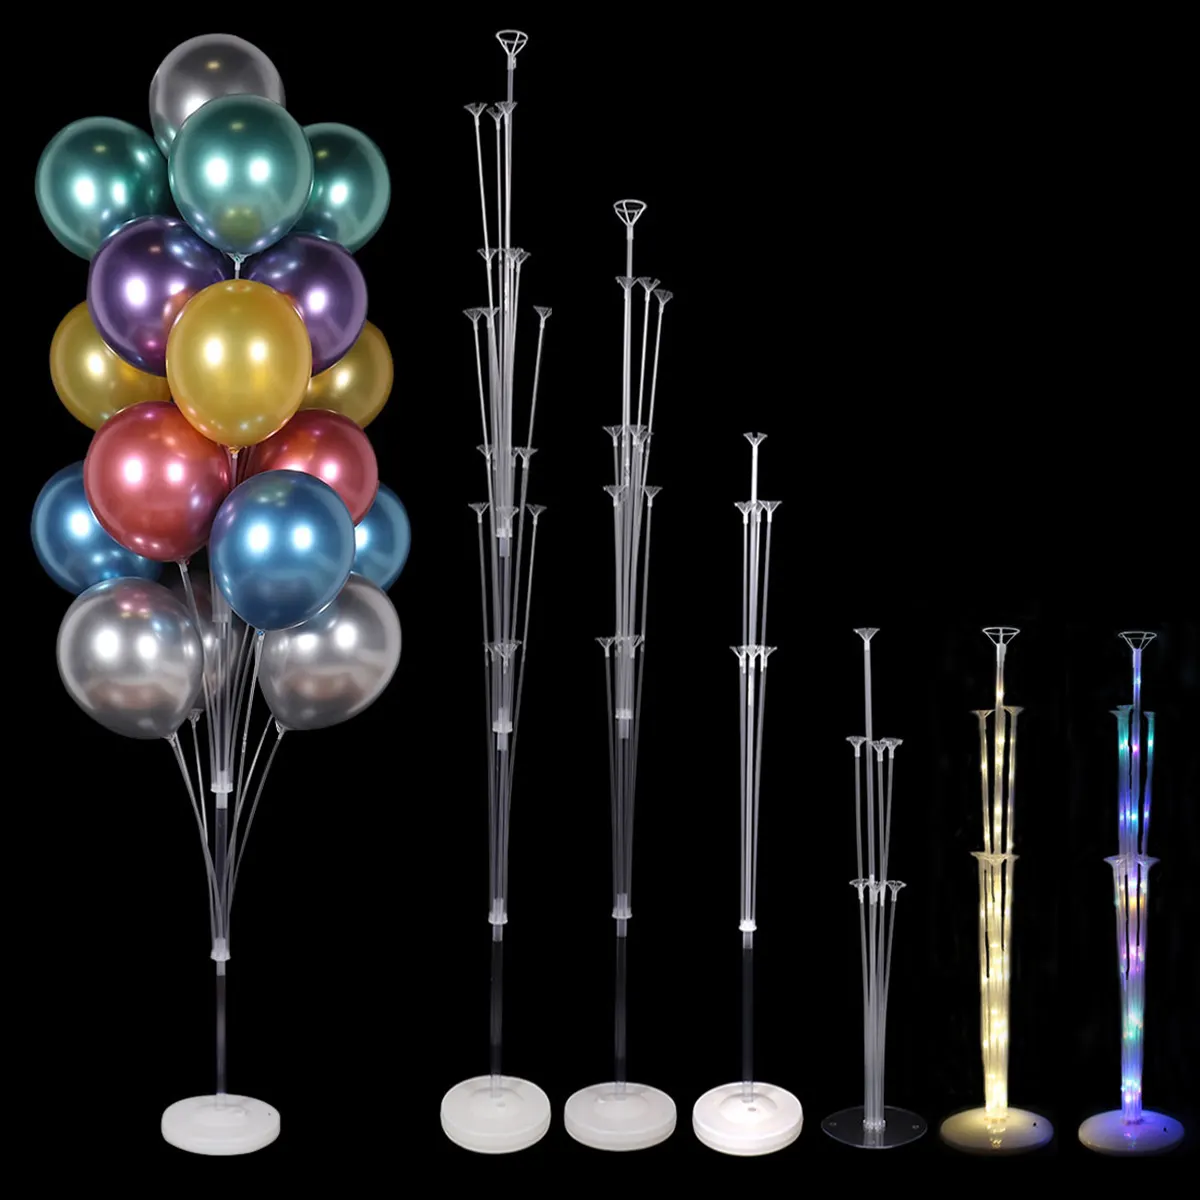 Balloon Table Stand Upright Pole Holder For Wedding Birthday Party Decorations Balloon Accessories Balloon Stand Party Supplies